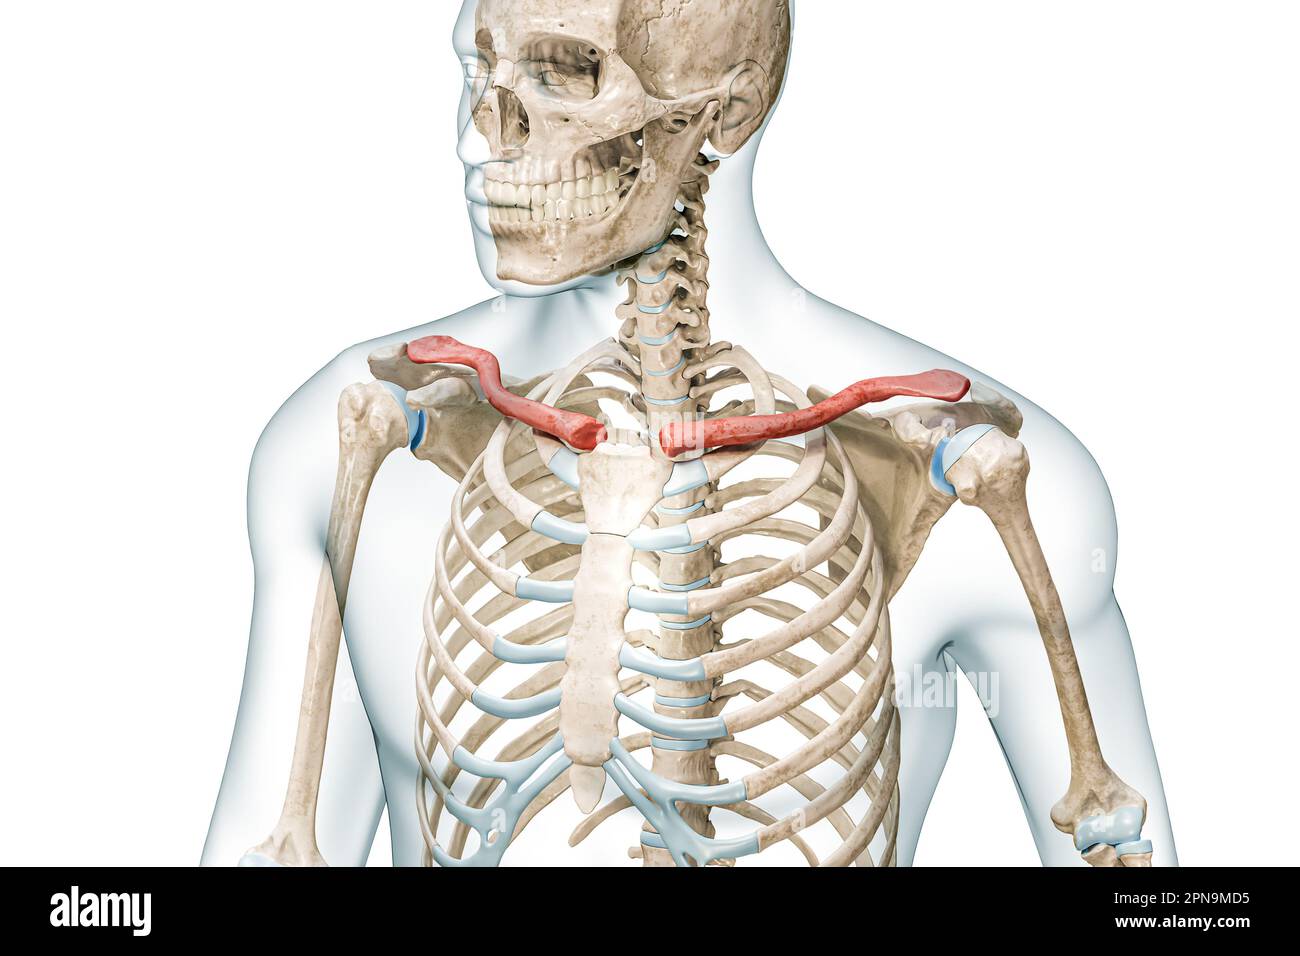 Clavicle bones or collarbones in color with body 3D rendering illustration isolated on white with copy space. Human skeleton anatomy, medical diagram, Stock Photo